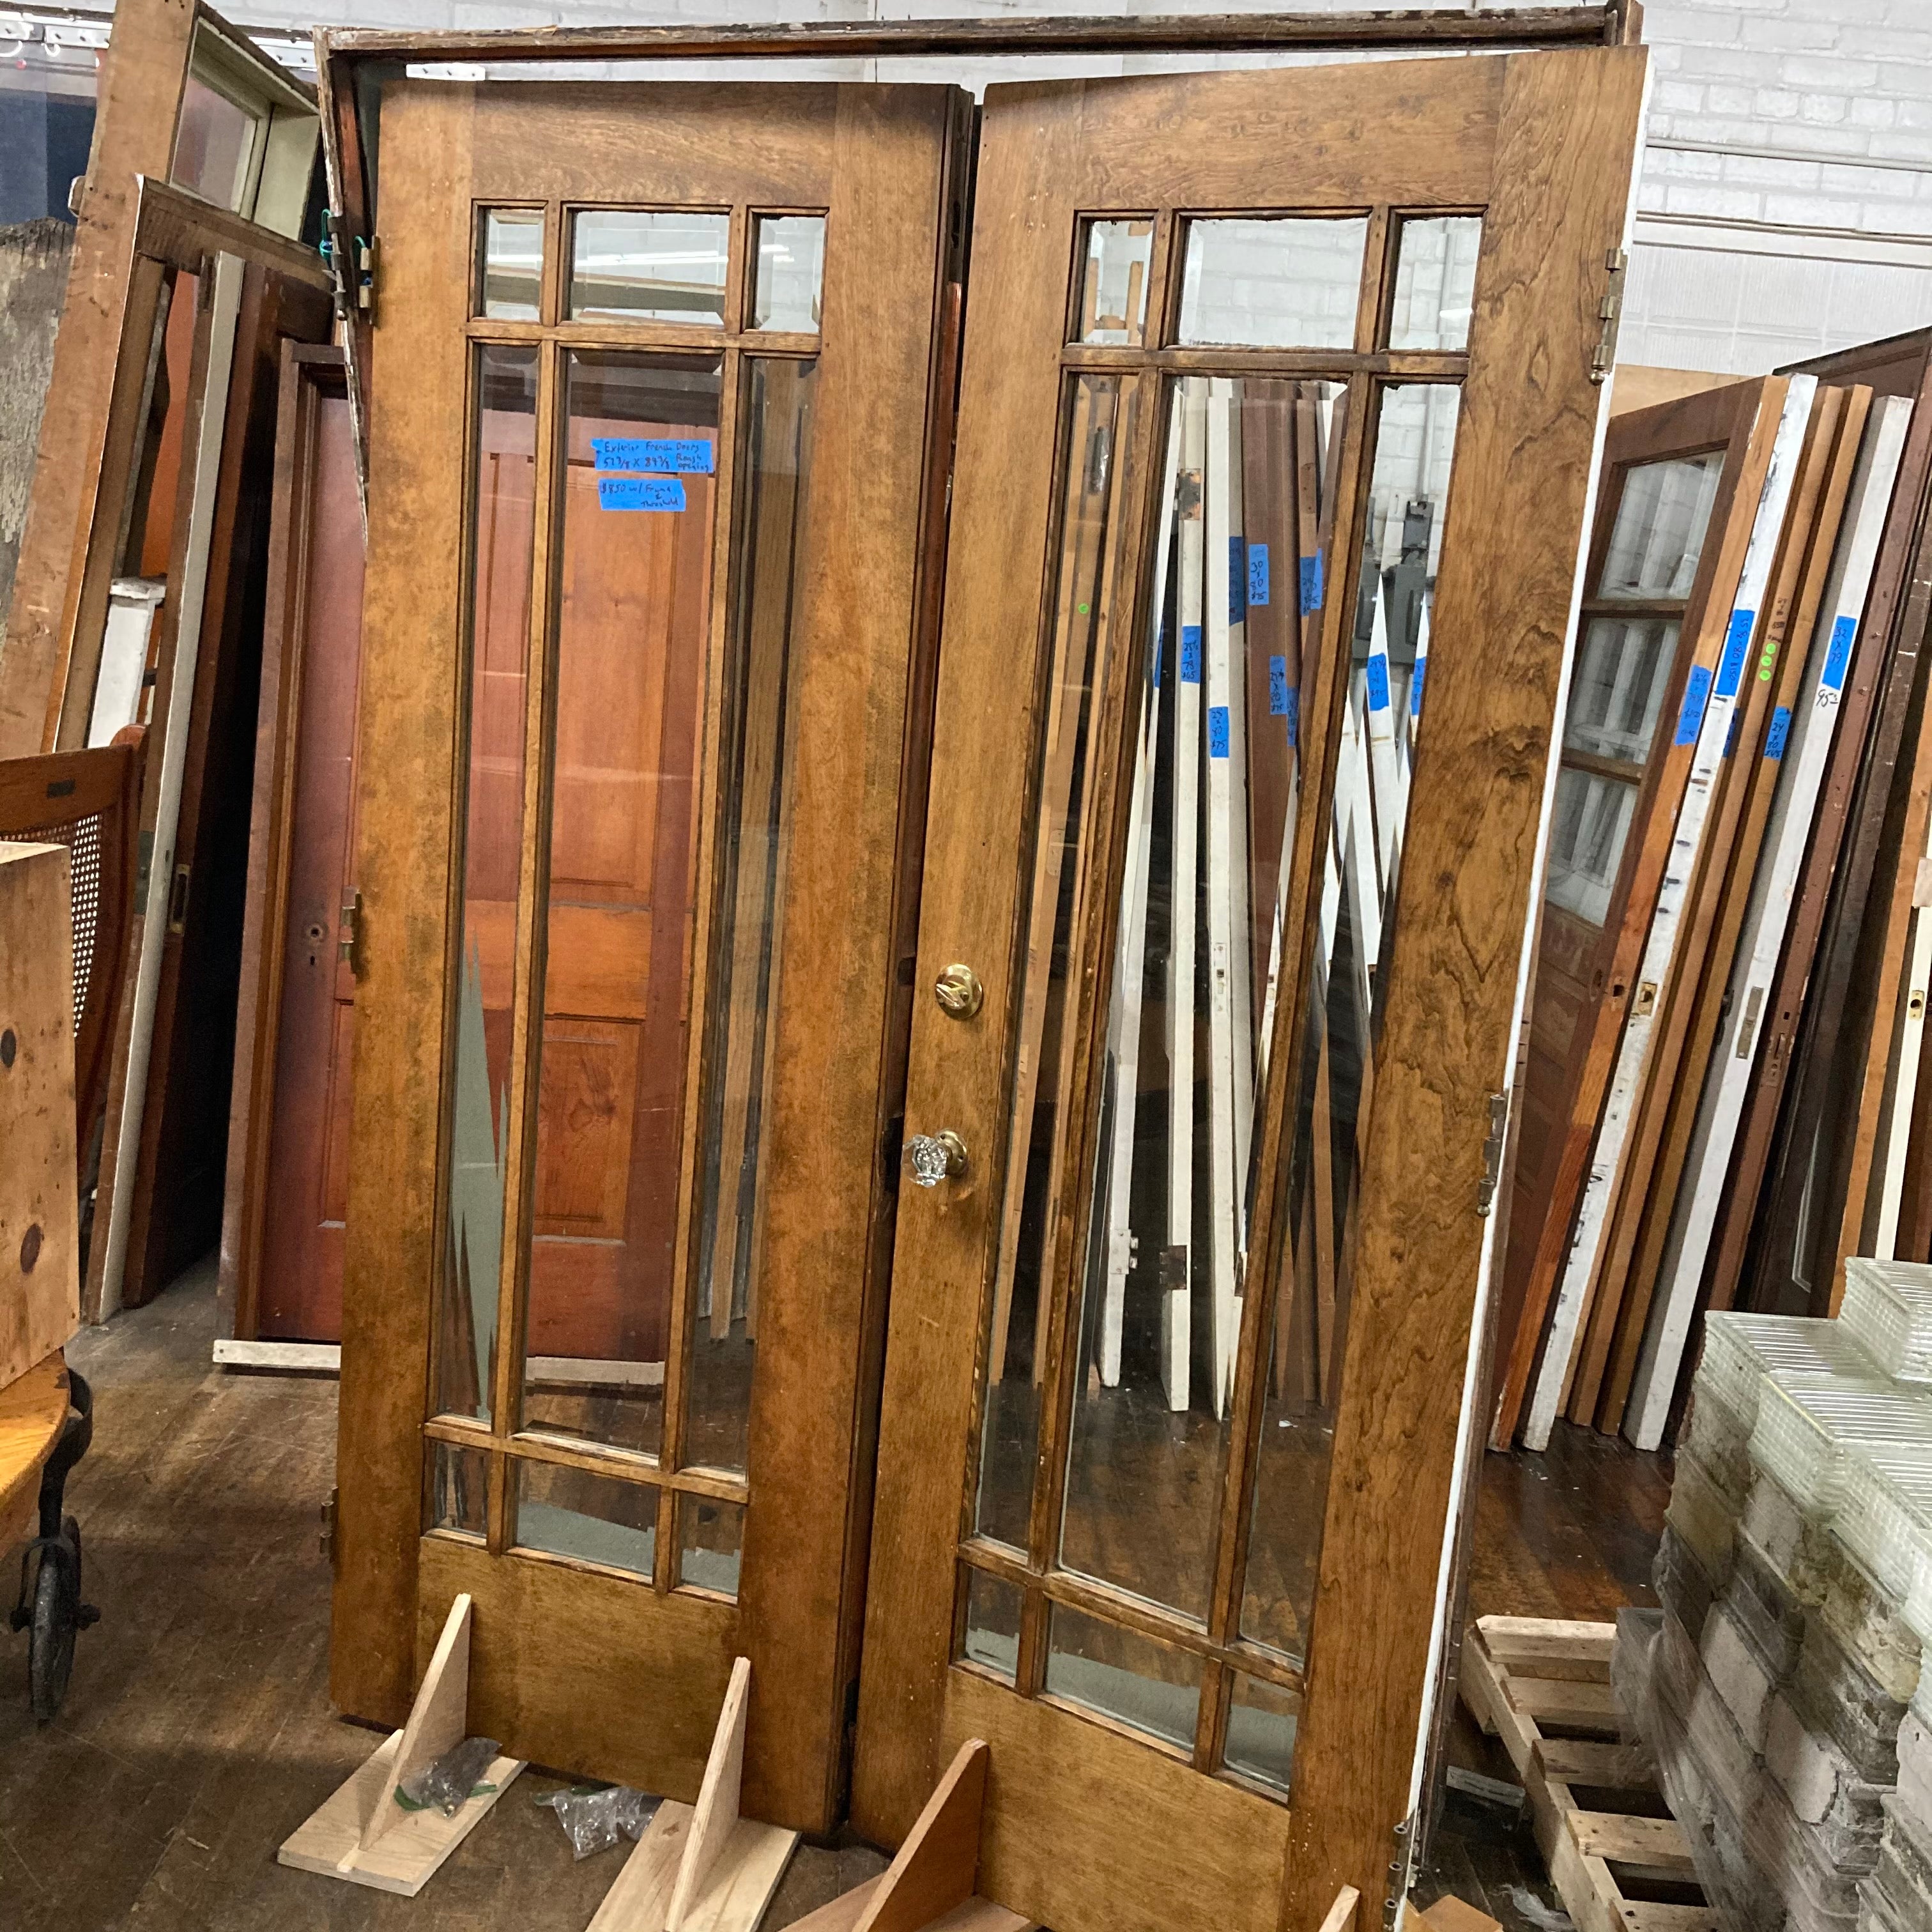 Antique Exterior French Doors with Beveled Glass - Includes Frame